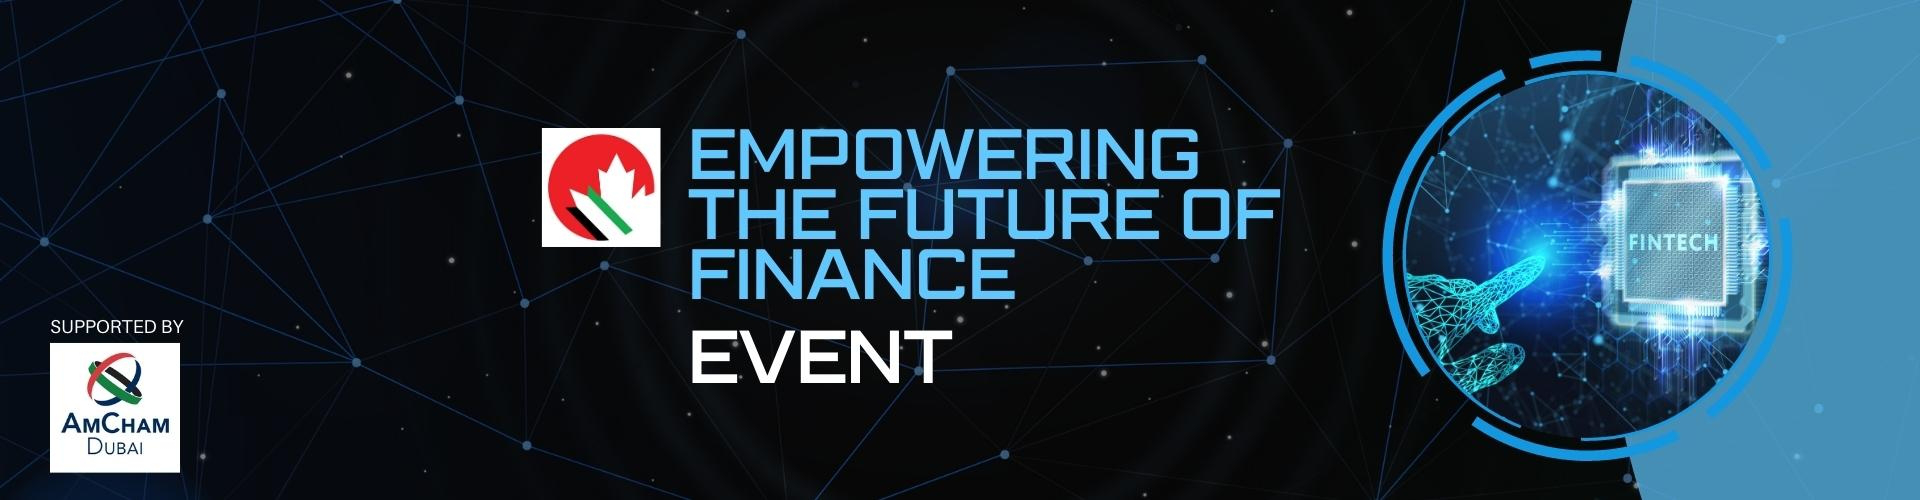 thumbnails Empowering the Future of Finance-The Rise of FinTech